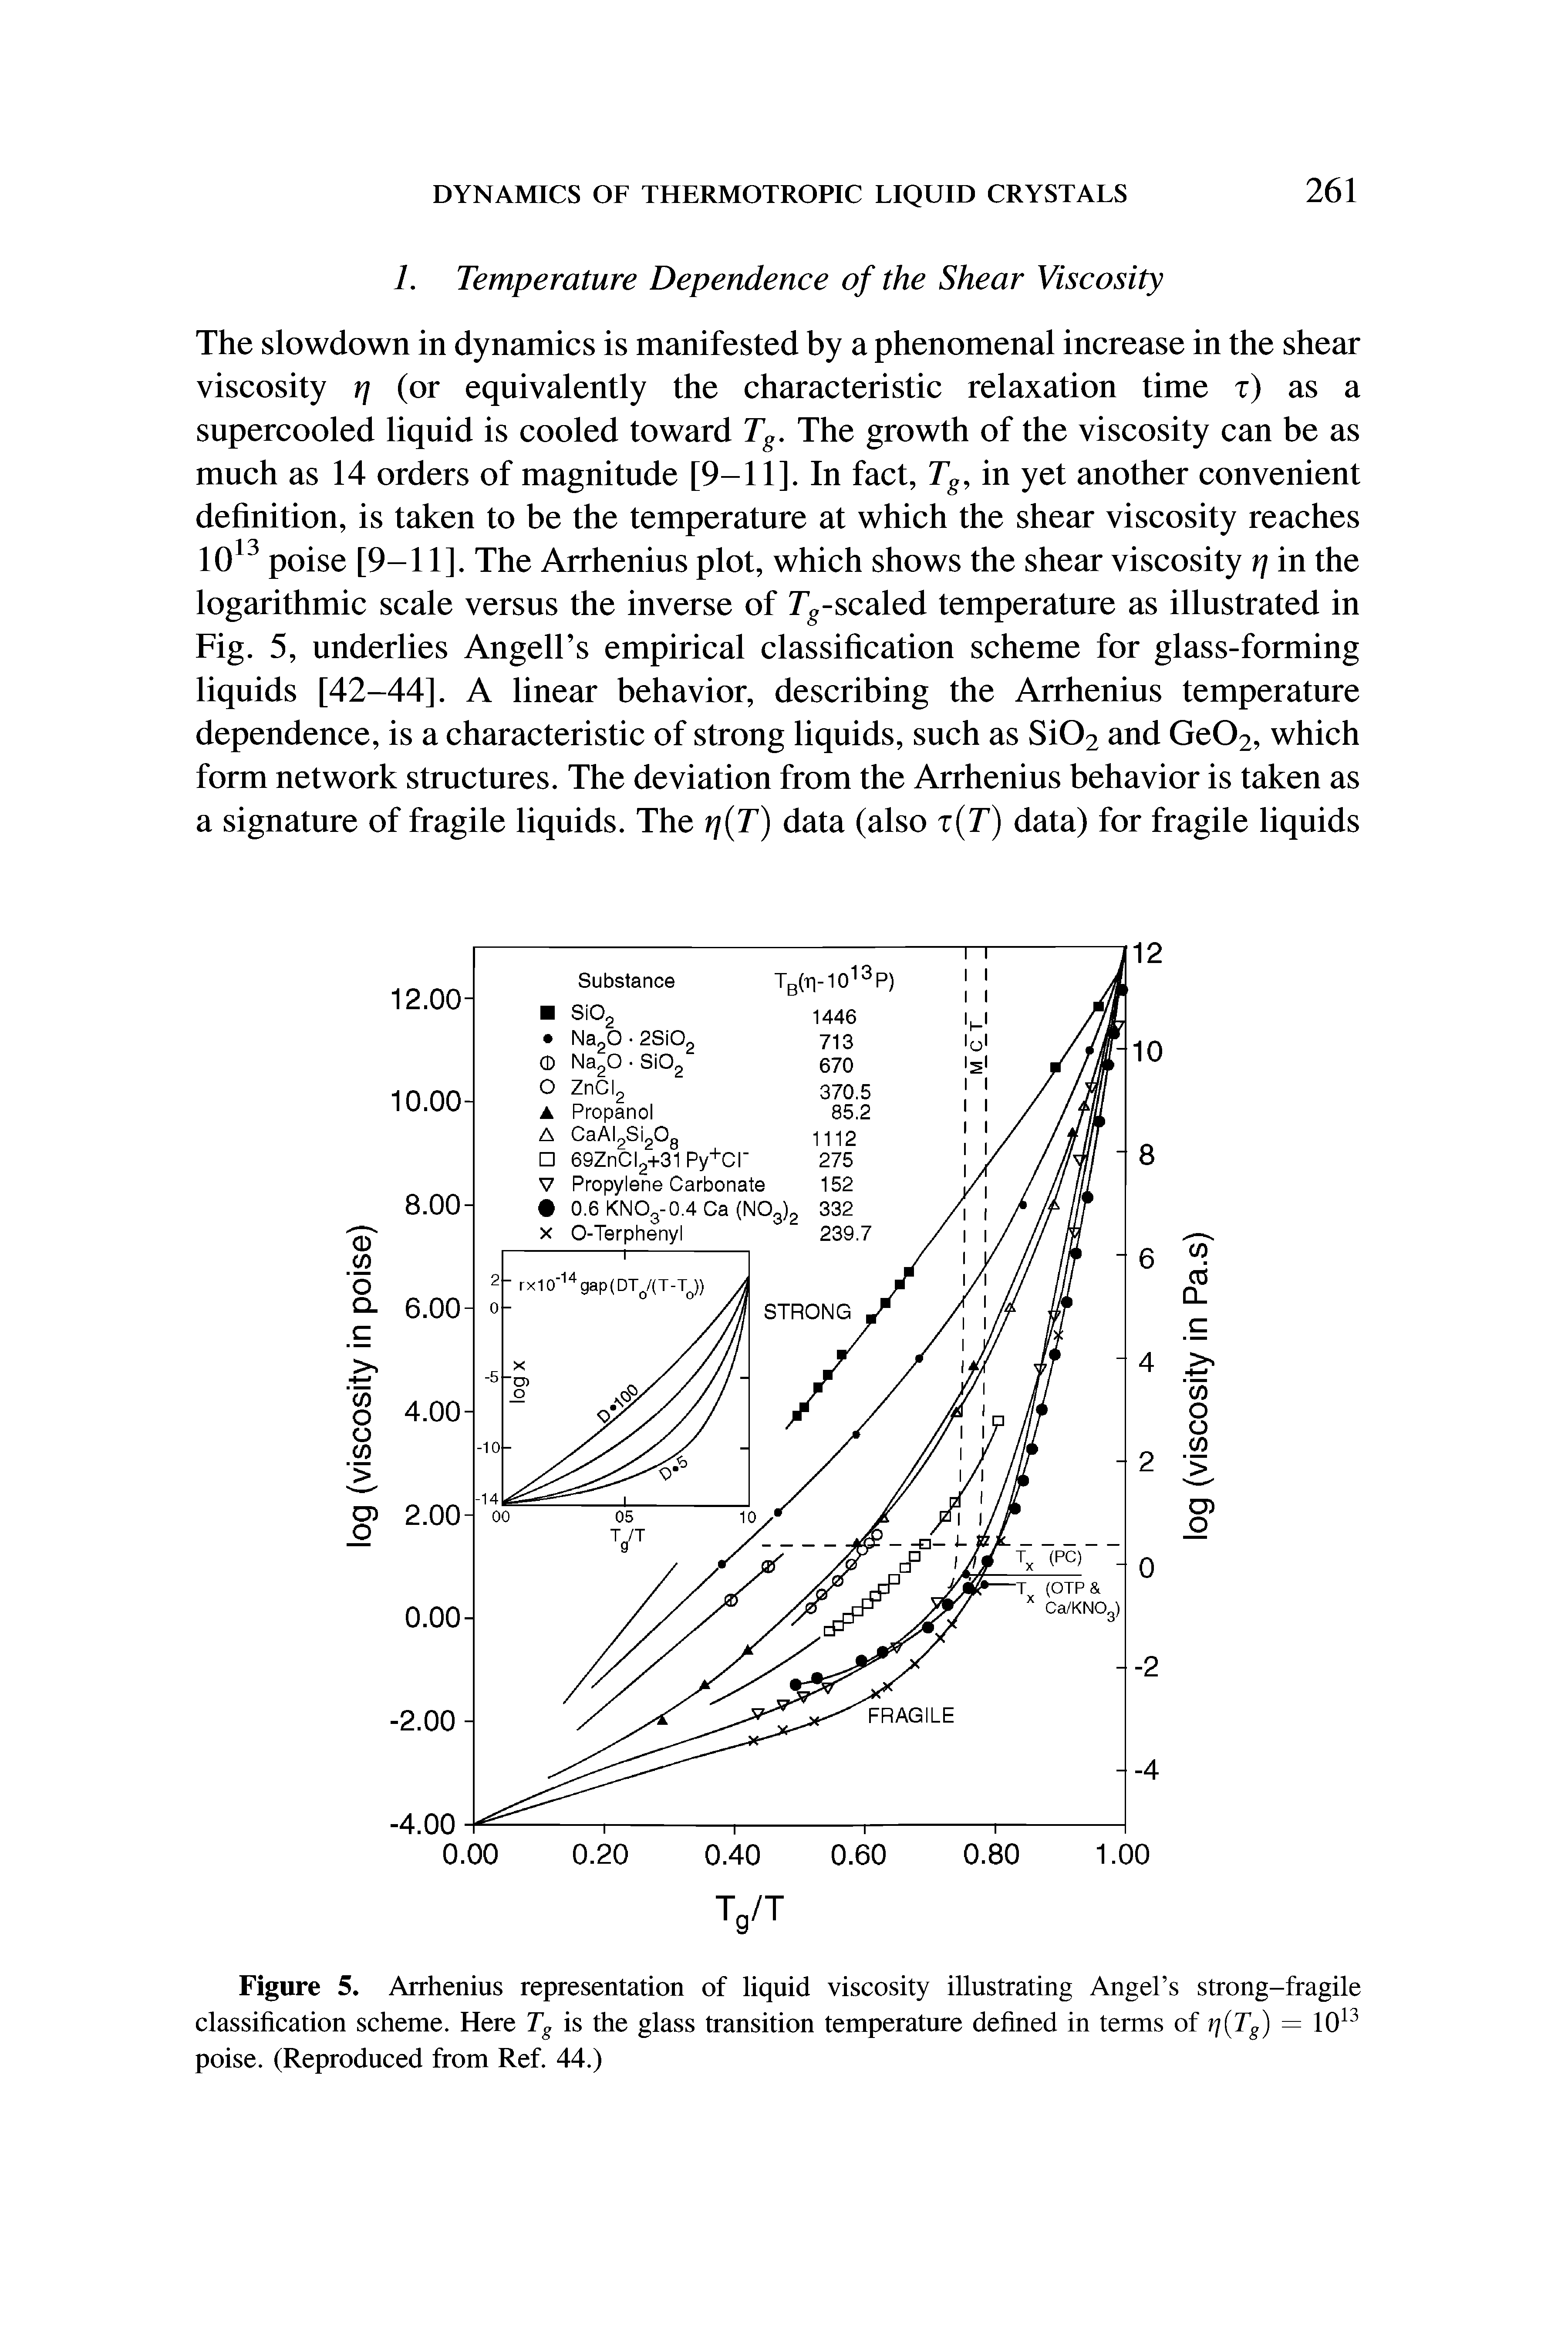 Figure 5. Arrhenius representation of liquid viscosity illustrating Angel s strong-fragile classification scheme. Here Tg is the glass transition temperature defined in terms of r/(Tg) = 1013 poise. (Reproduced from Ref. 44.)...